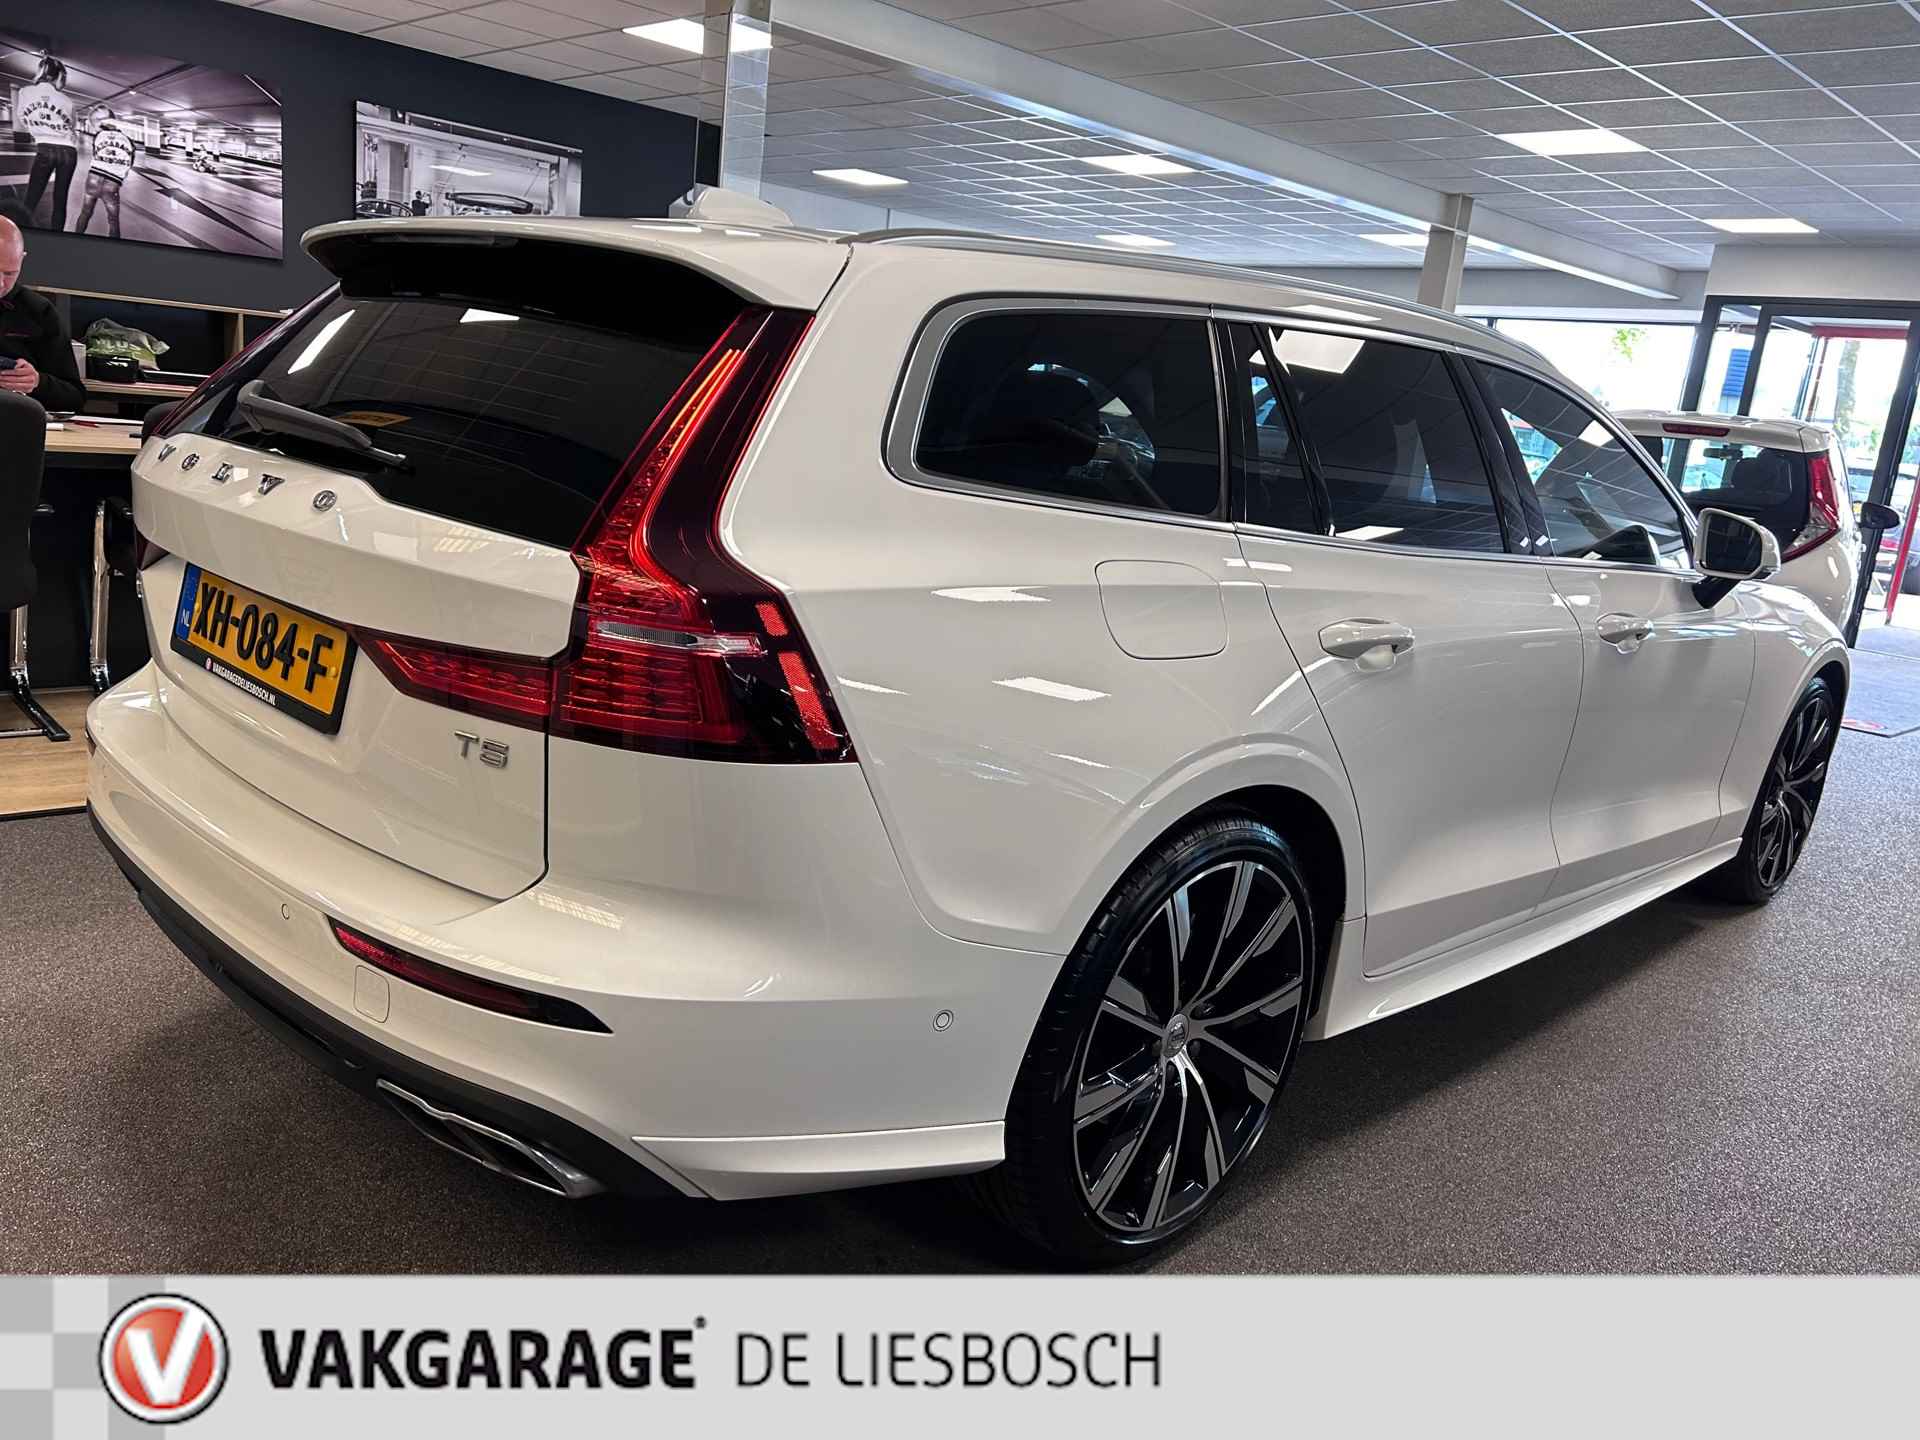 Volvo V60 2.0 T5 Momentum/Styling kit/Automaat/Led/20inch/360 camera - 7/34